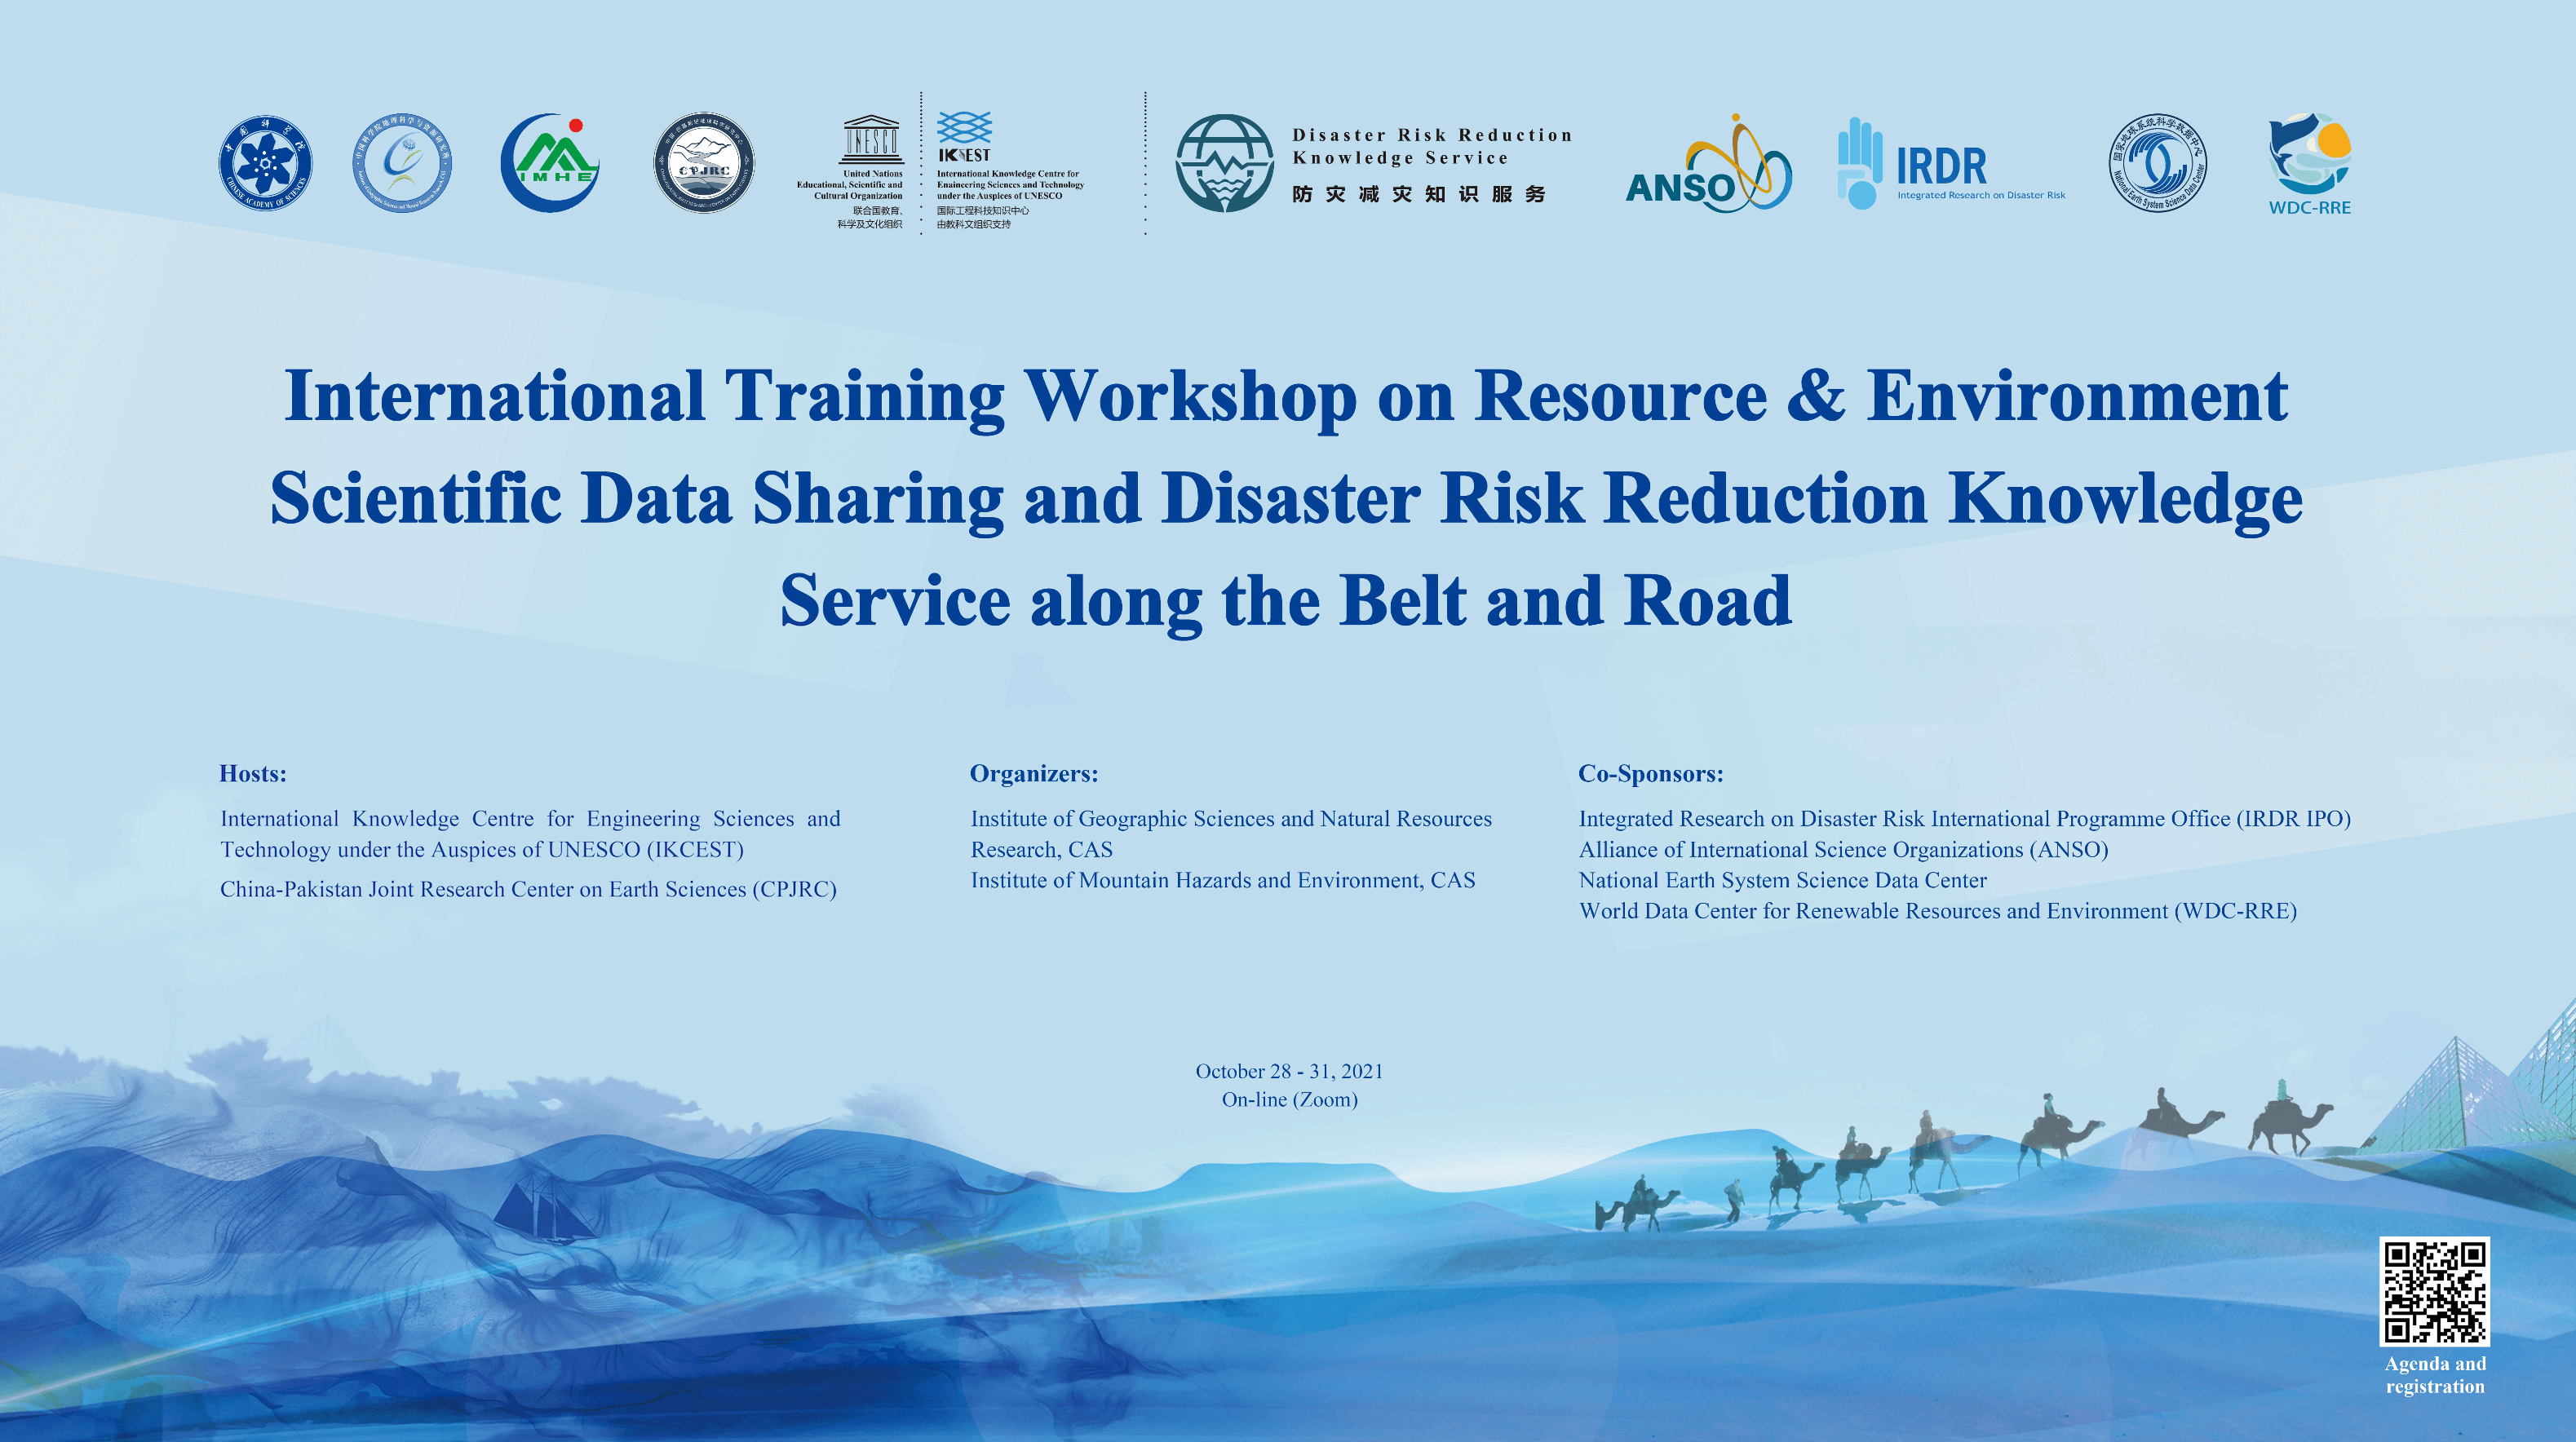 International Training Workshop on Resource & Environment Scientific Data Sharing and Disaster Risk Reduction Knowledge Service along the Belt and Road